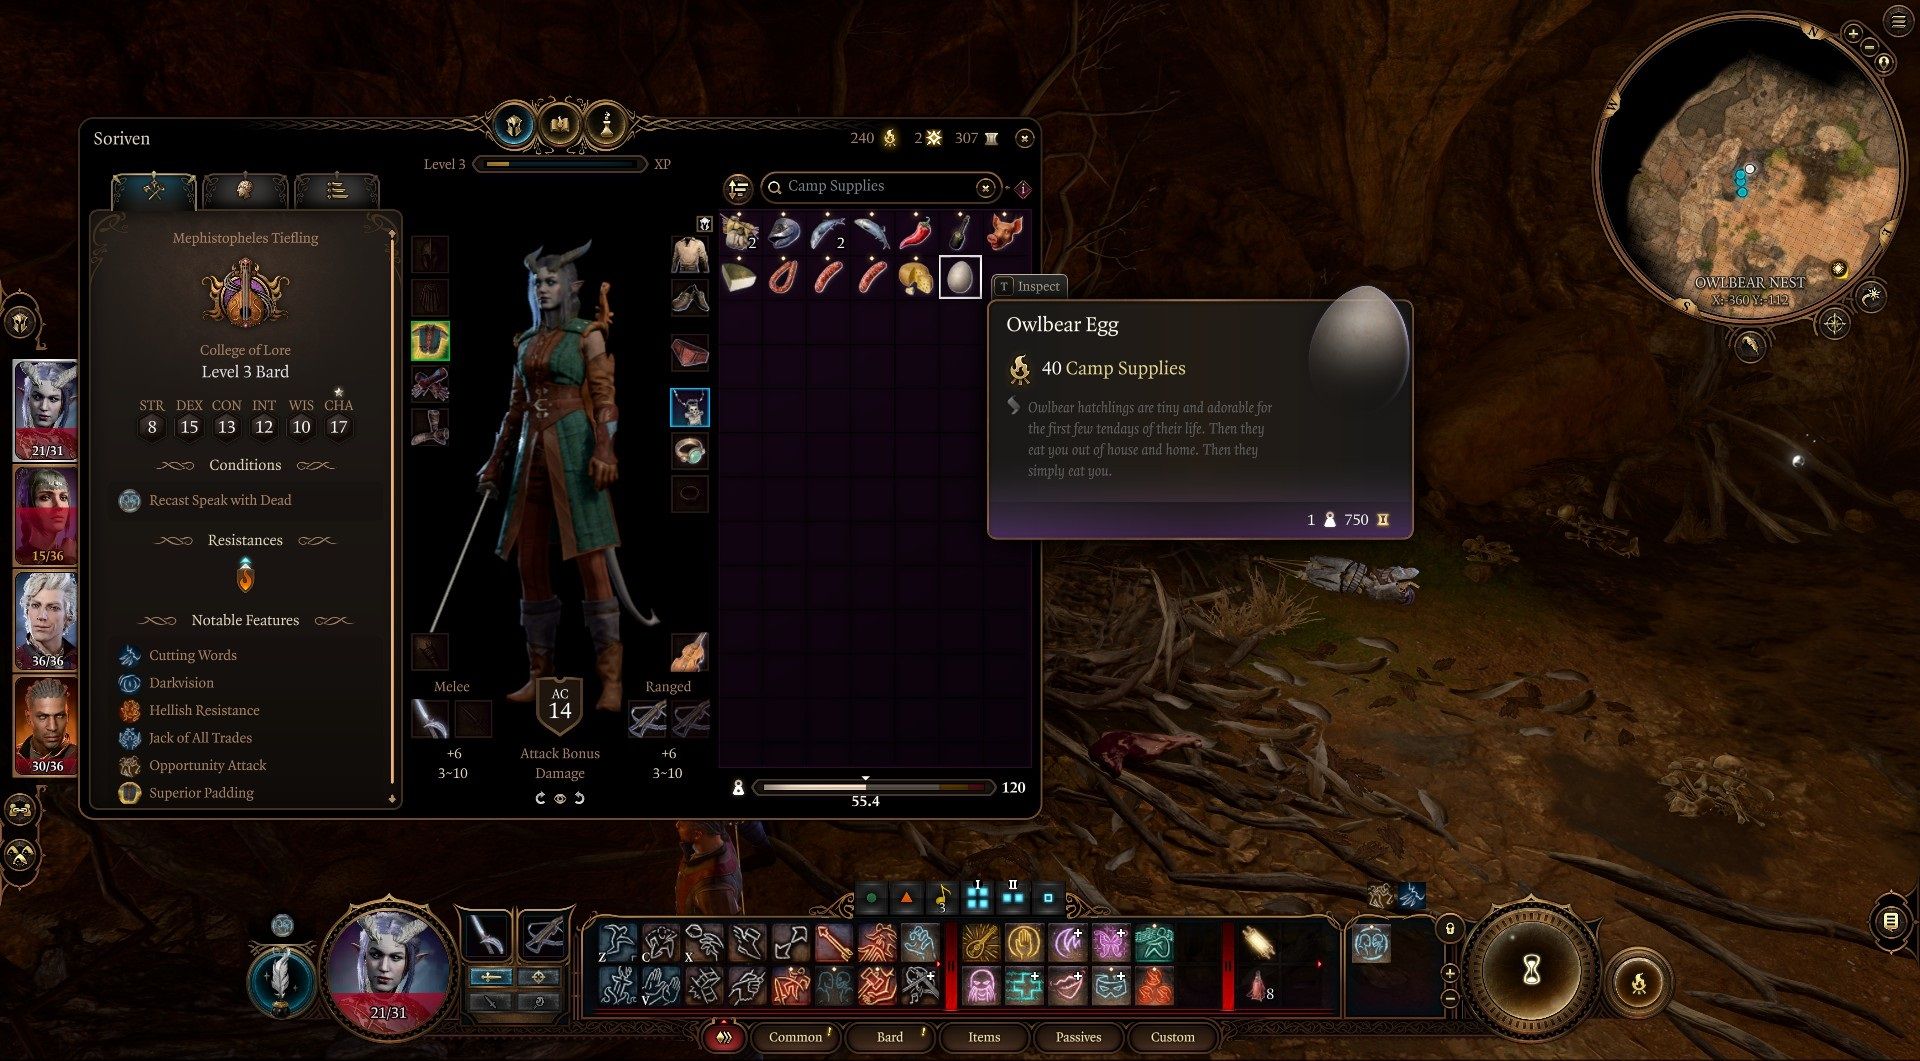 A tiefling player in the inventory screen showing the Owlbear Egg highlighted in Baldur's Gate 3.